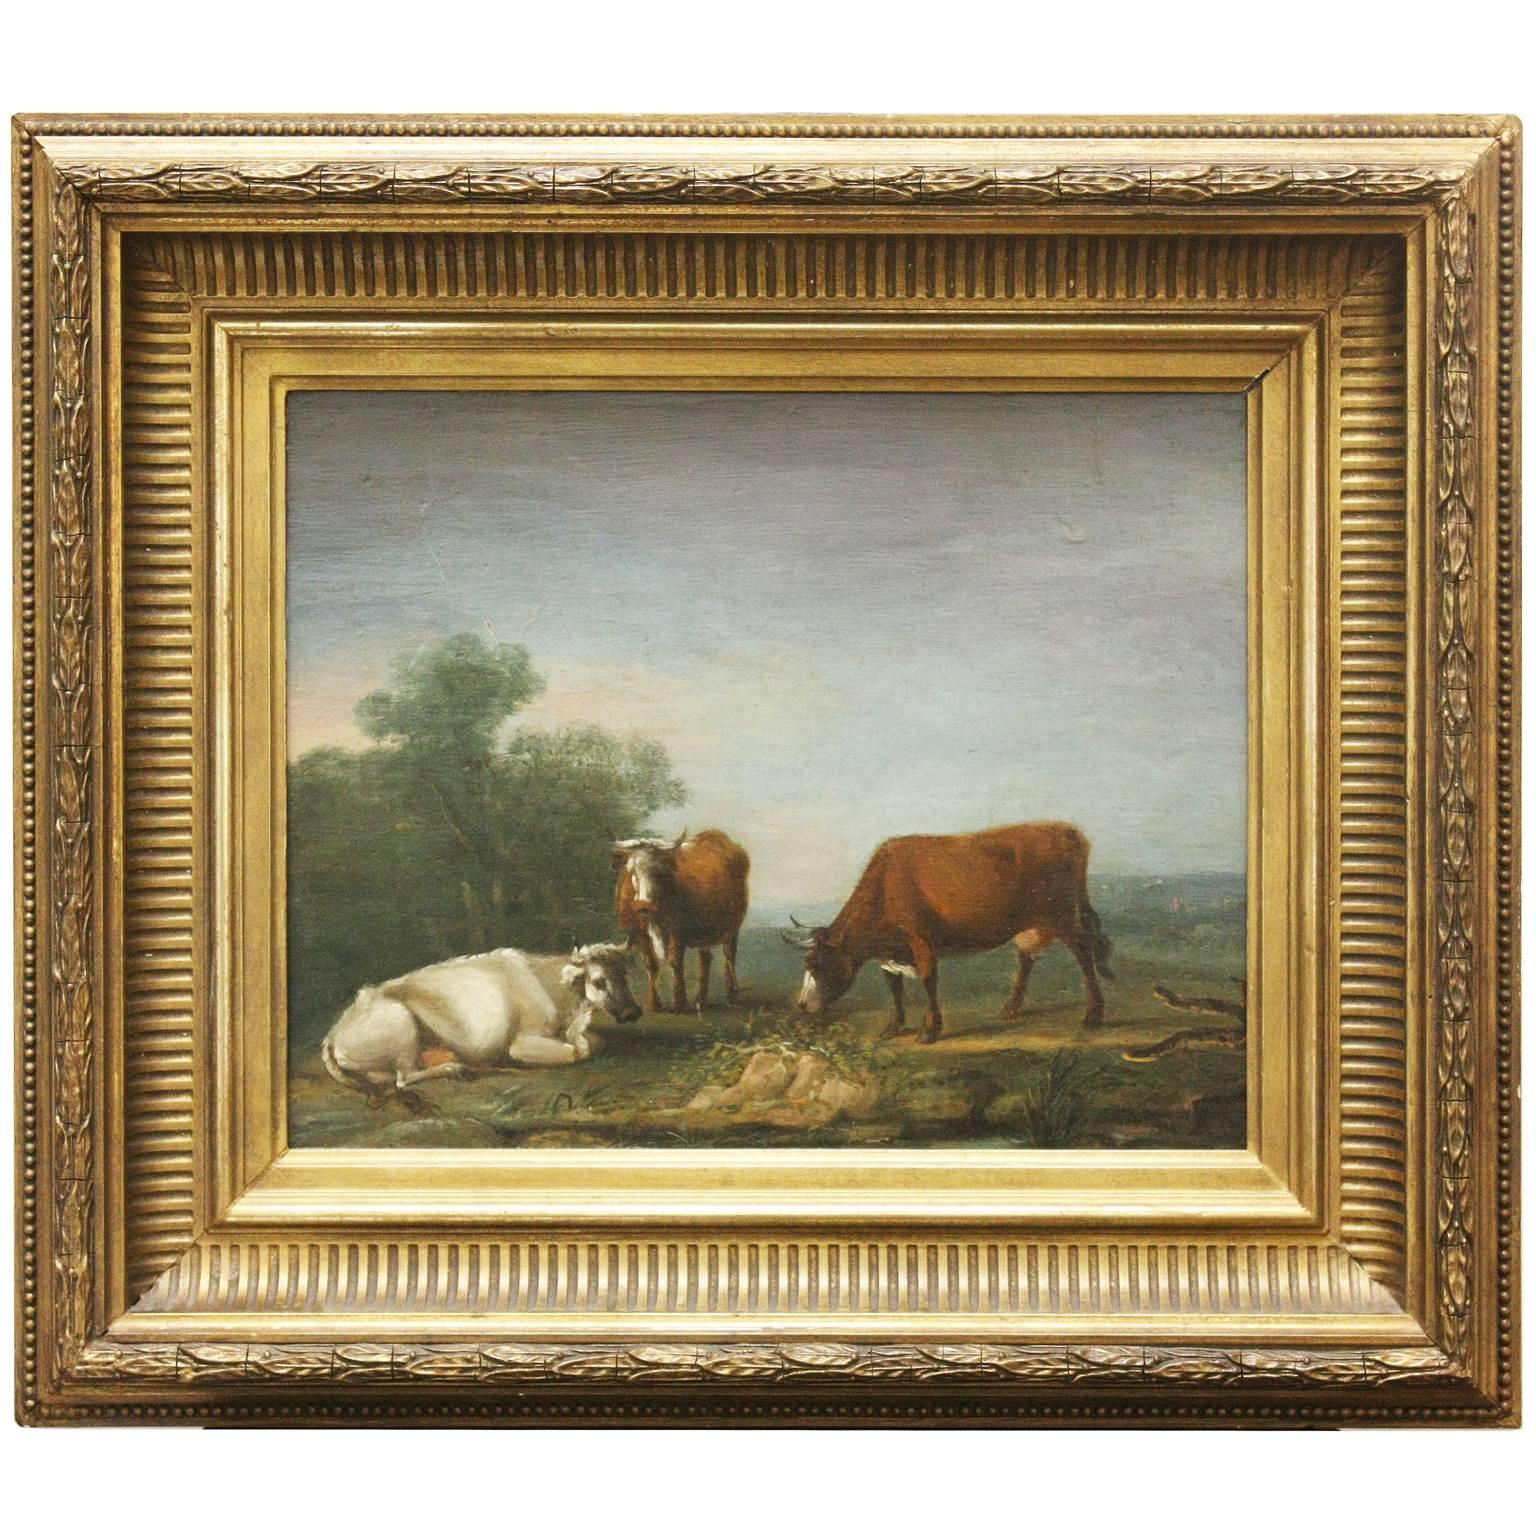 19th Century English Painting on Board of Cows